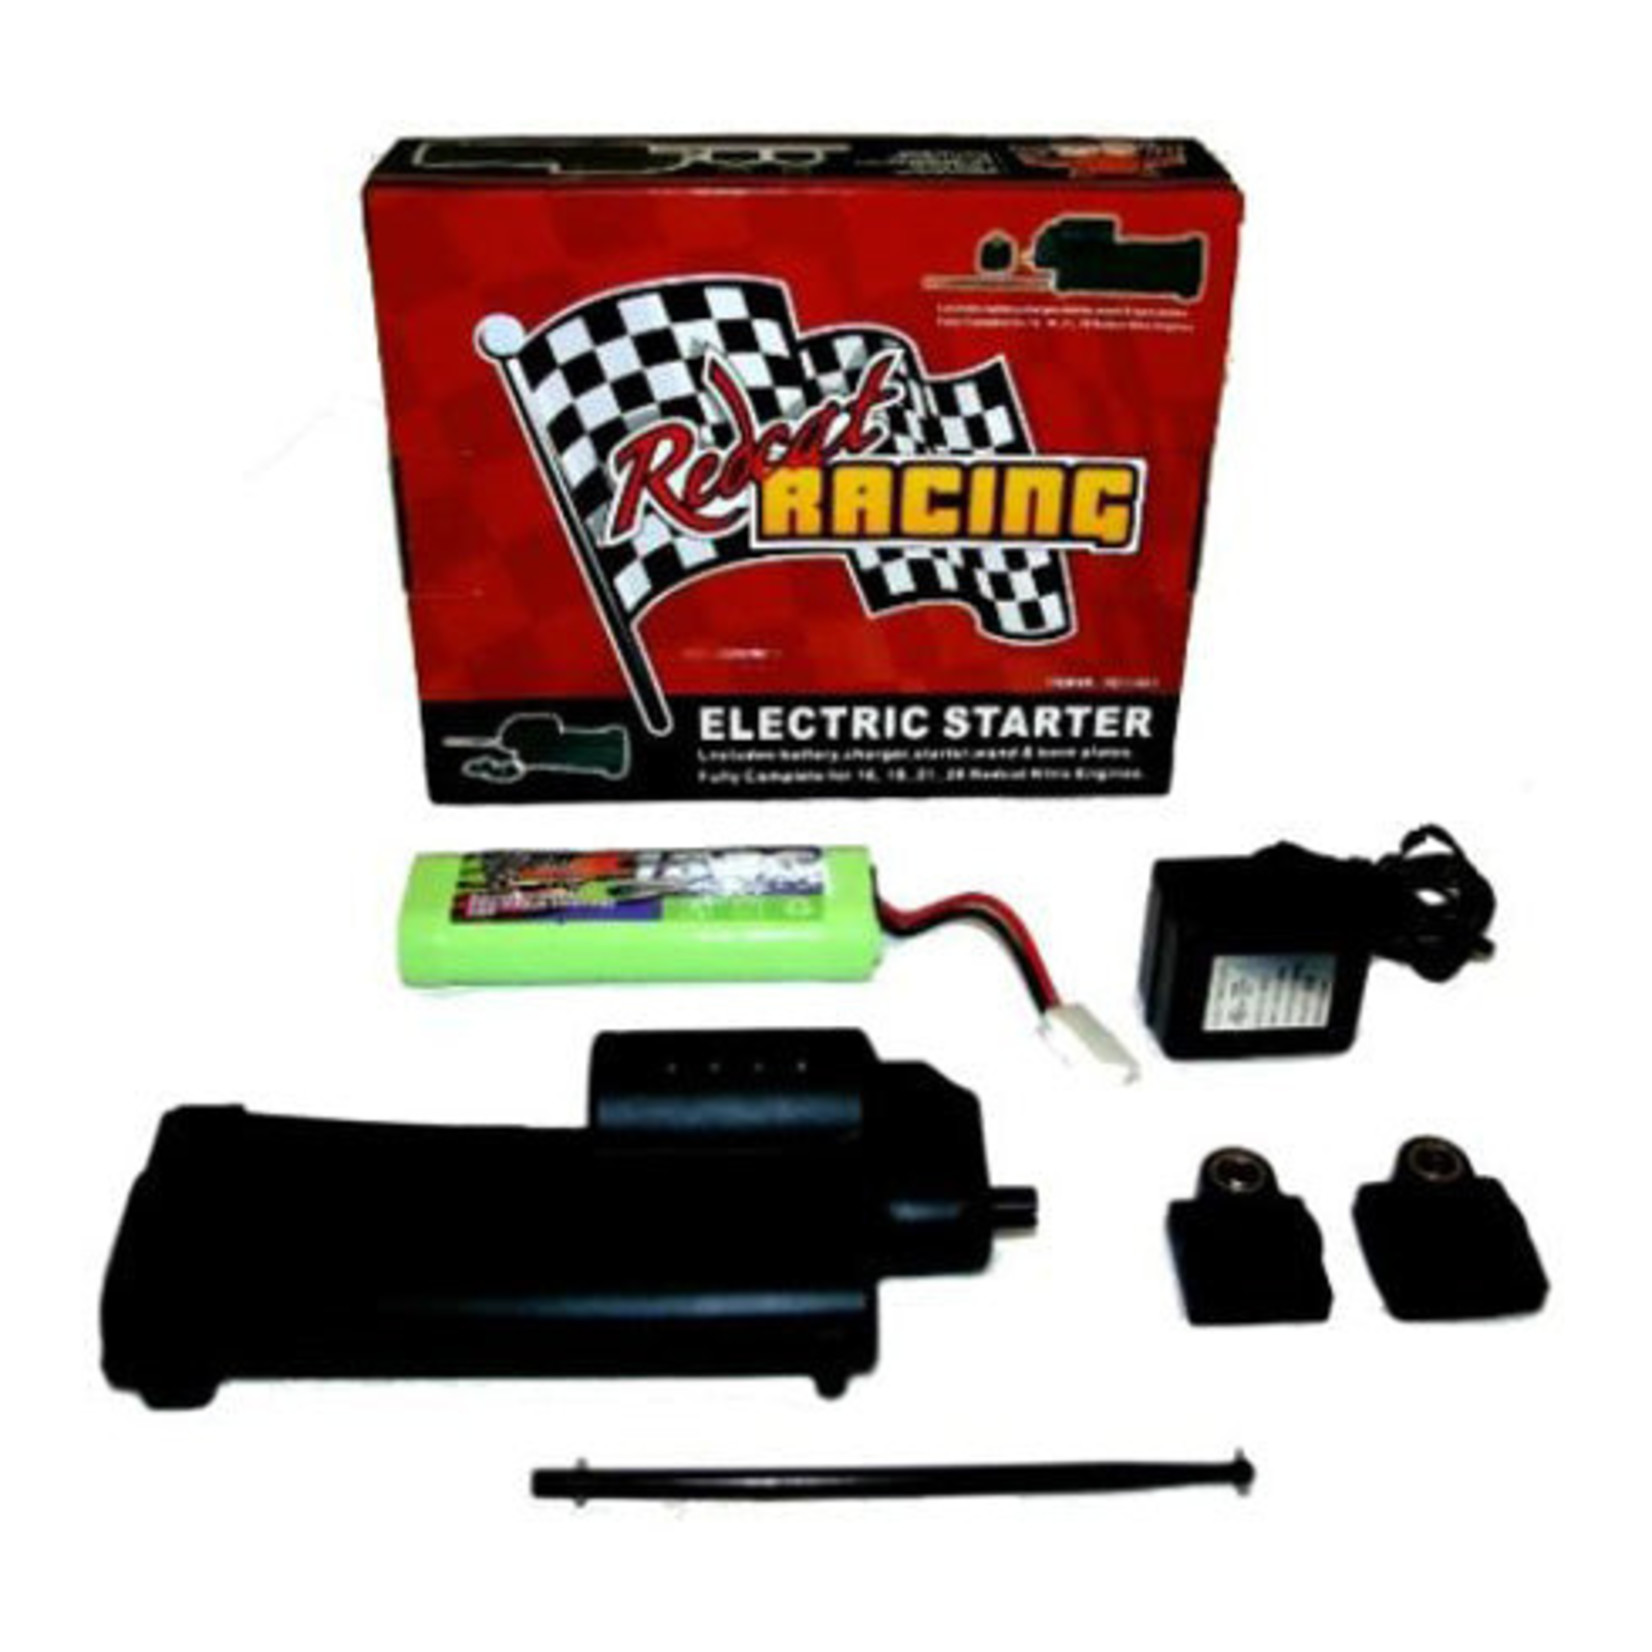 Redcat Racing 70111E-KIT  Electric Starter Kit - Complete with Starter Gun, 2 Back Plates, Battery, Charger and Wand